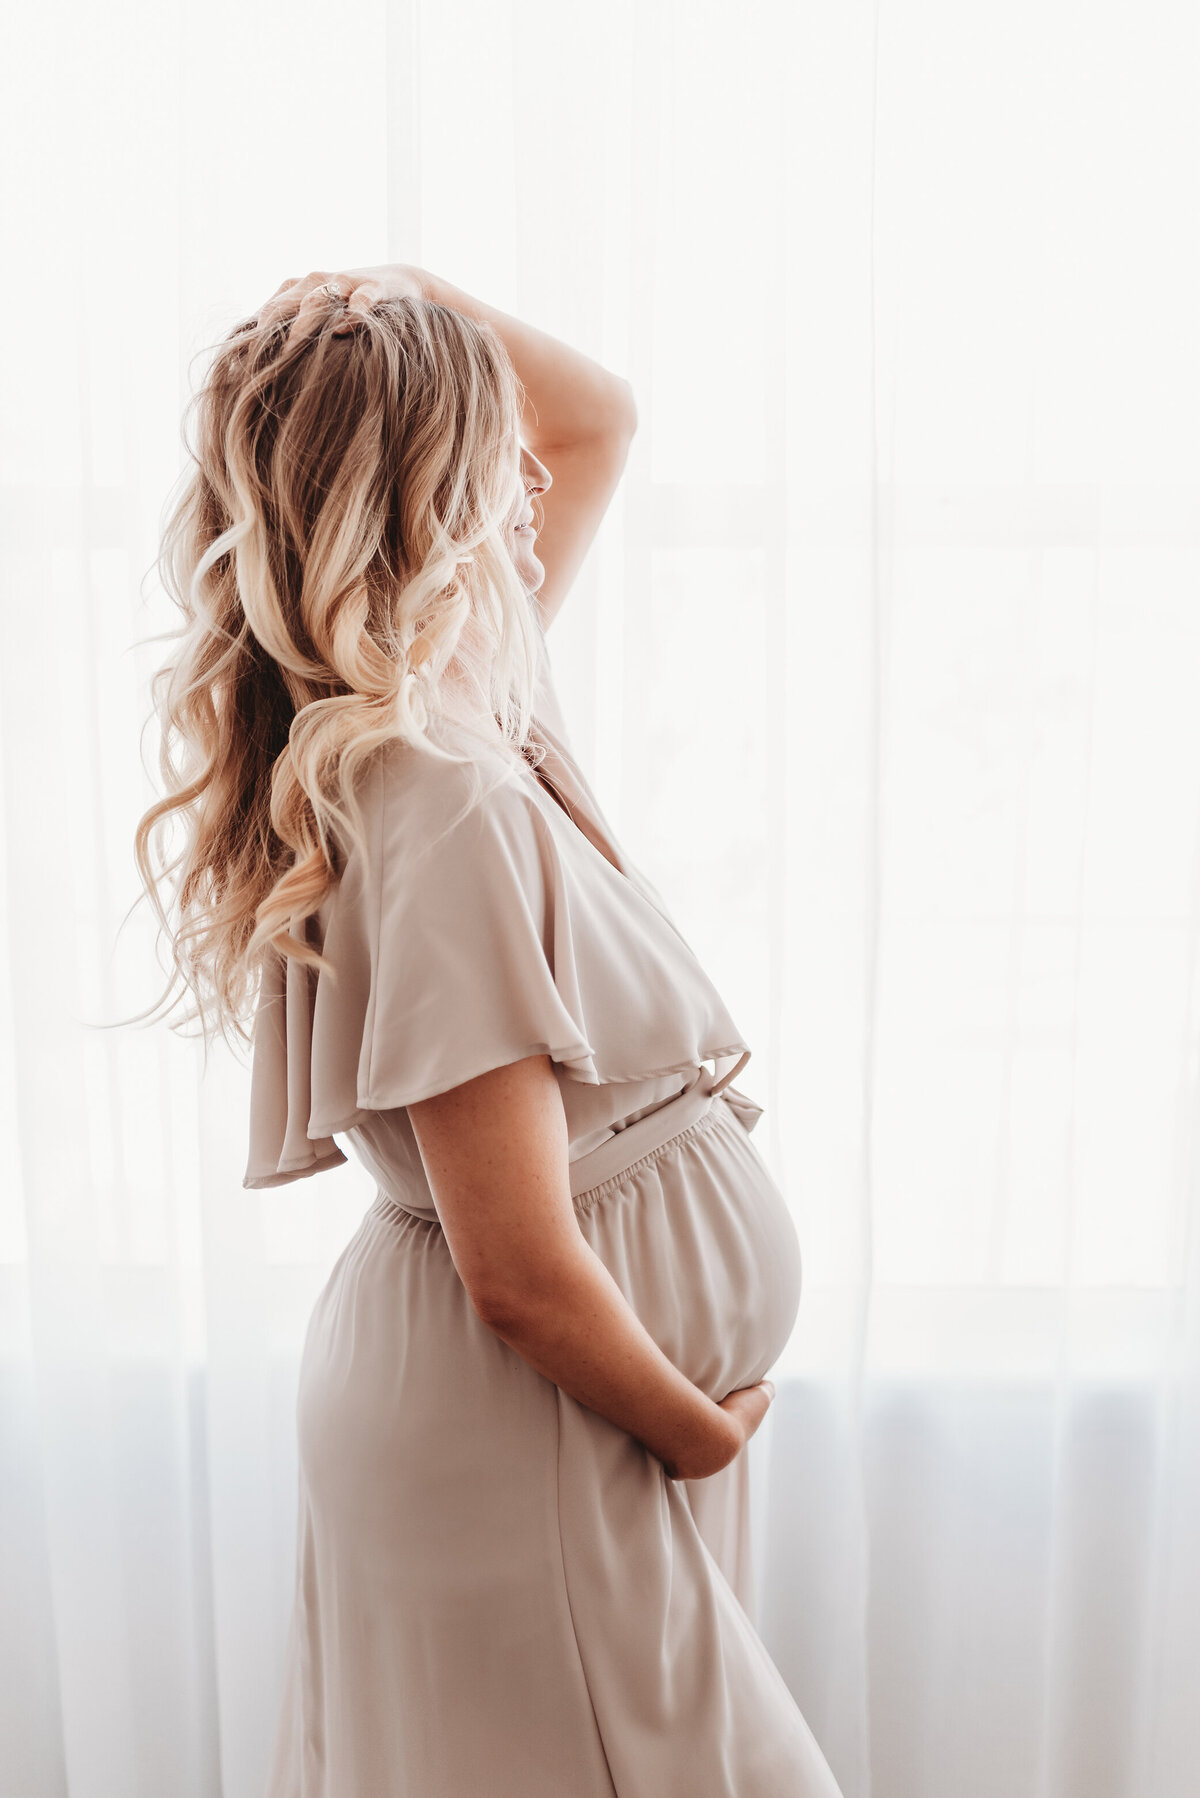 blonde woman holding her pregnant belly